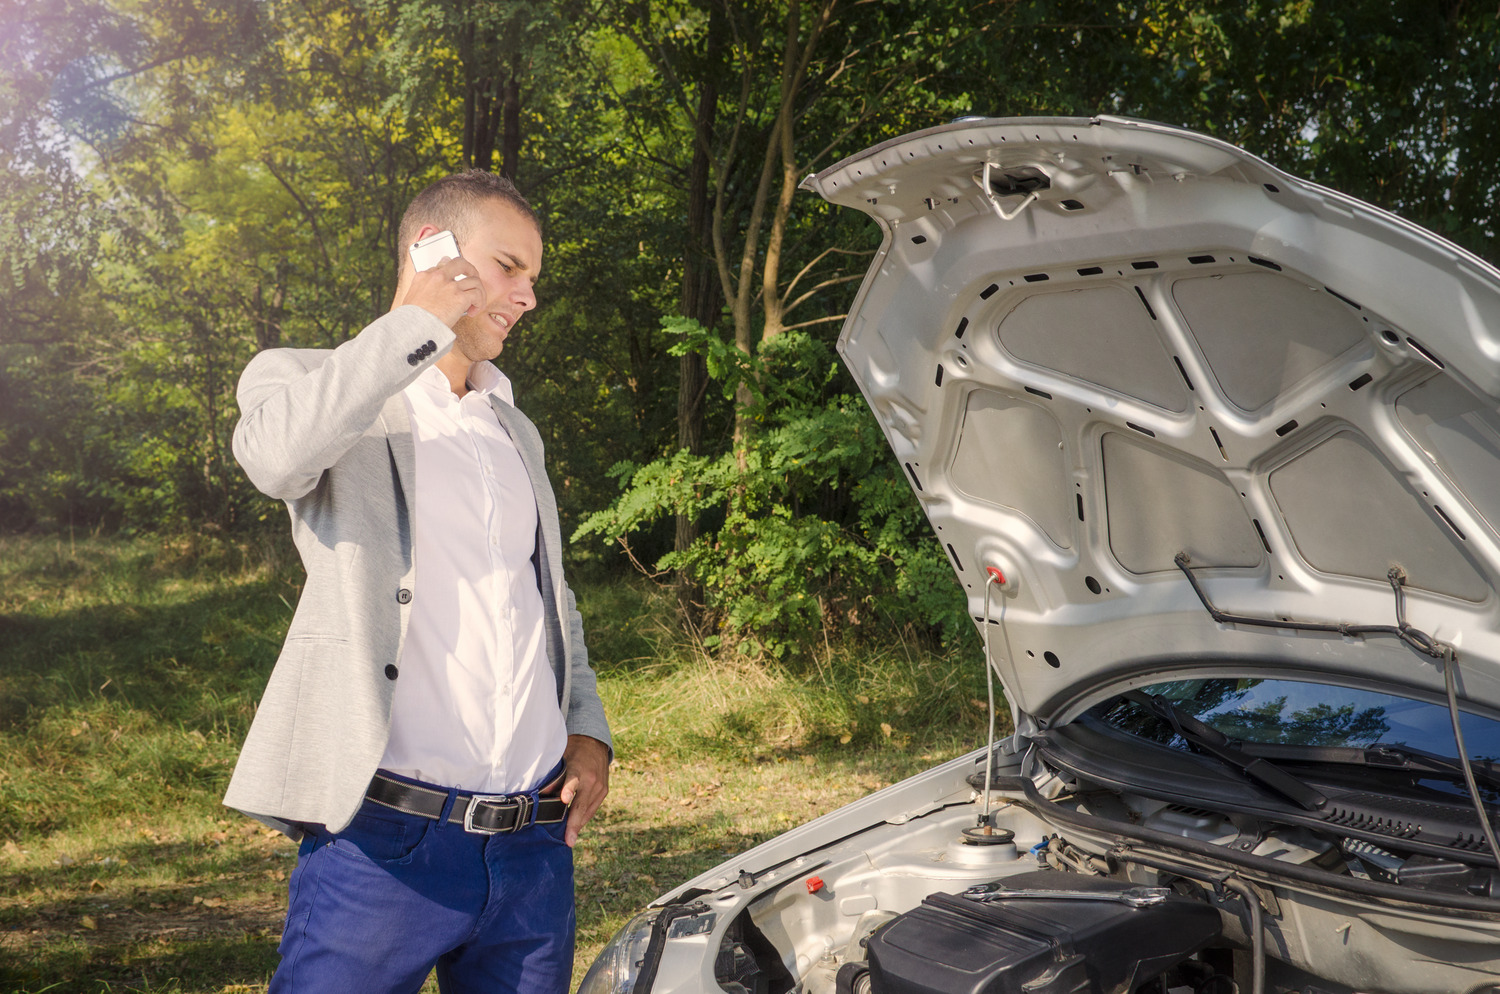 man-standing-by-open-hood-making-phone-call-trying-fix-vehicle (1)